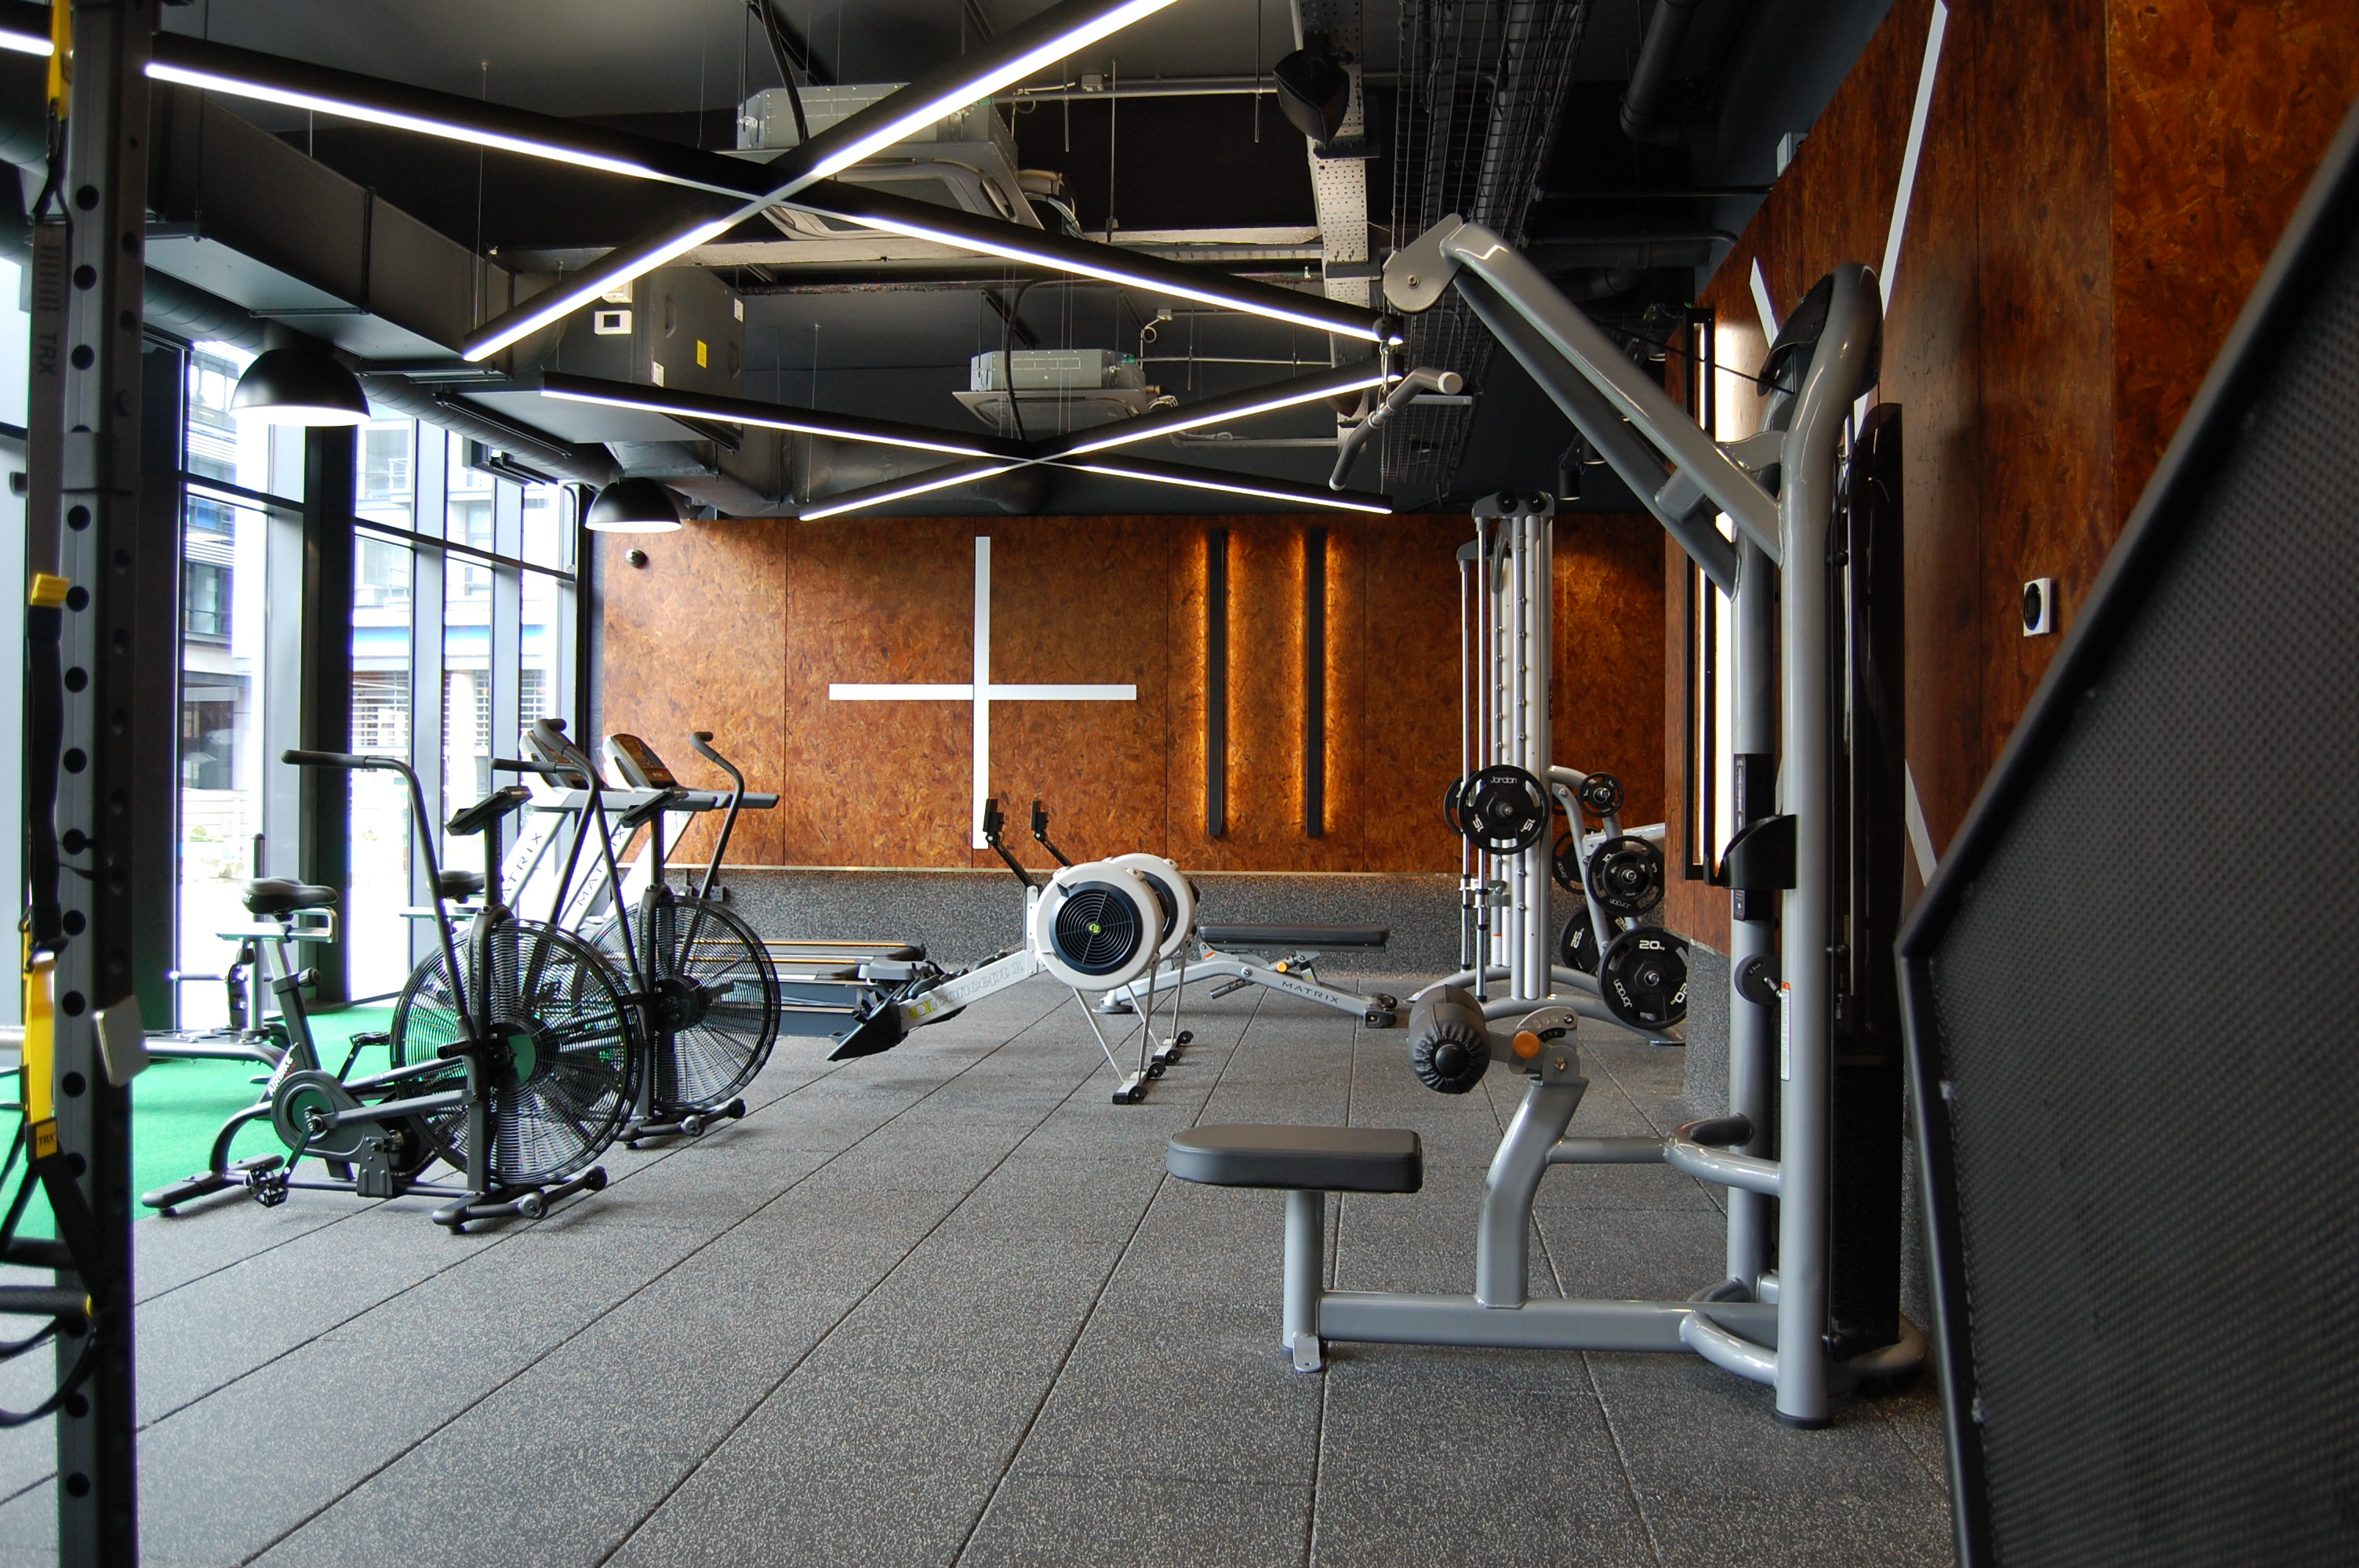 Arc-Tech completes successful gym installation